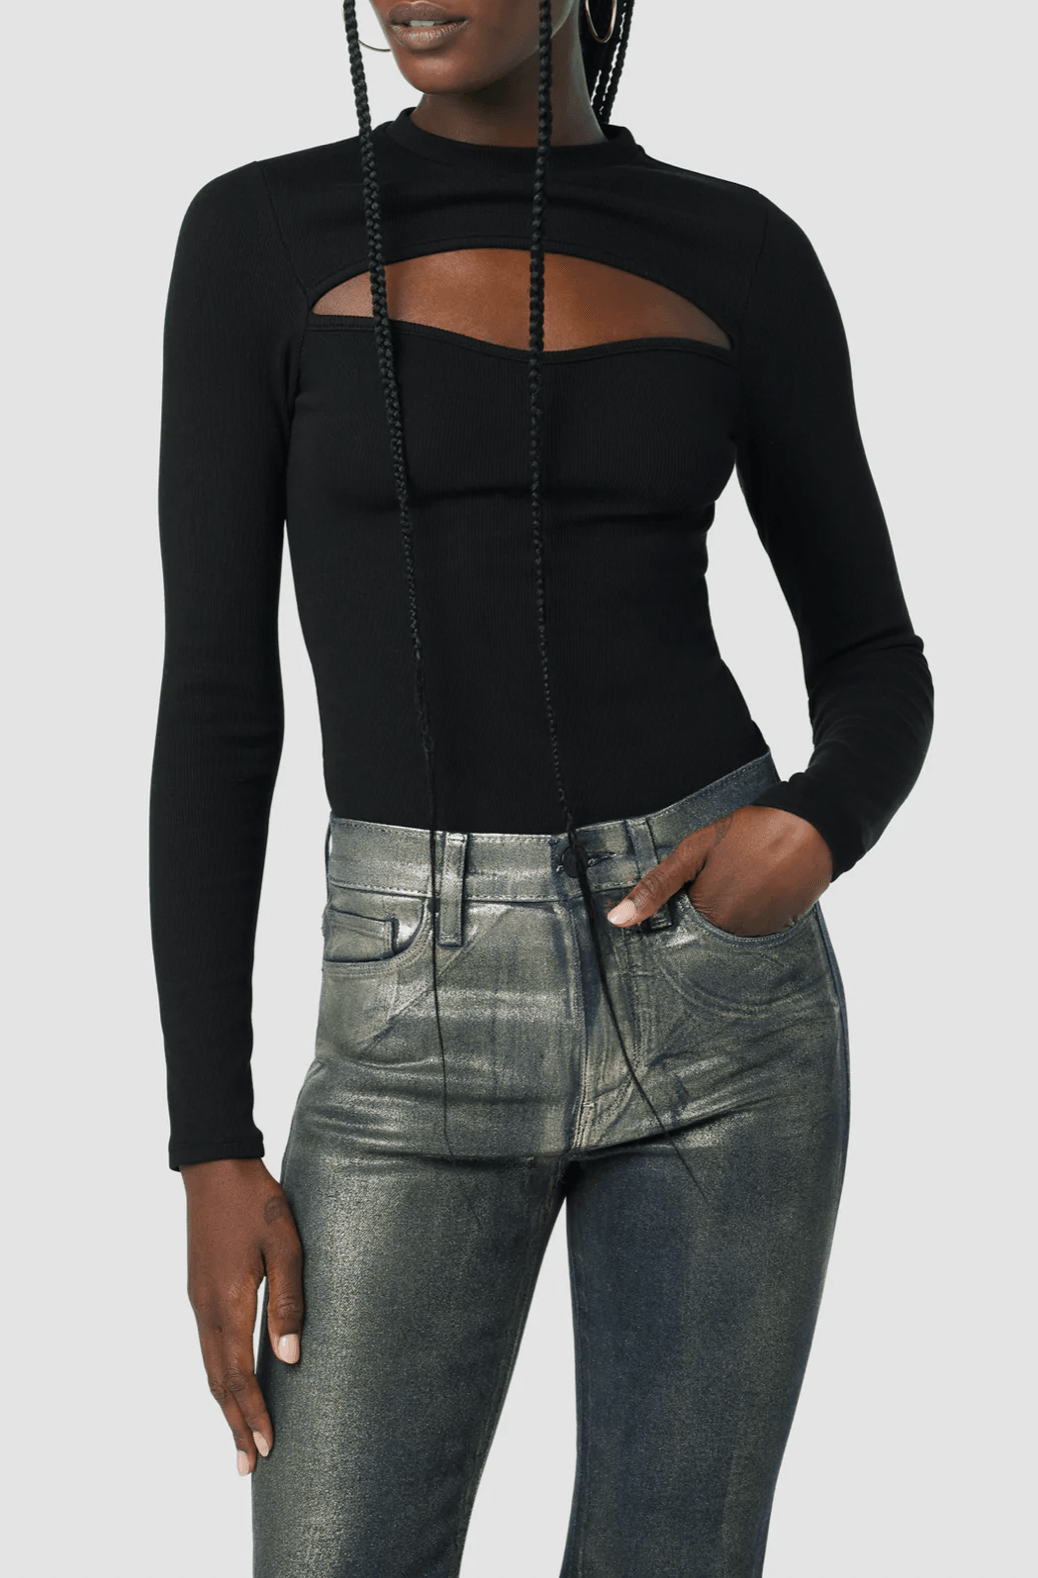 Sweetheart Cut Out Bodysuit by Hudson – Haven